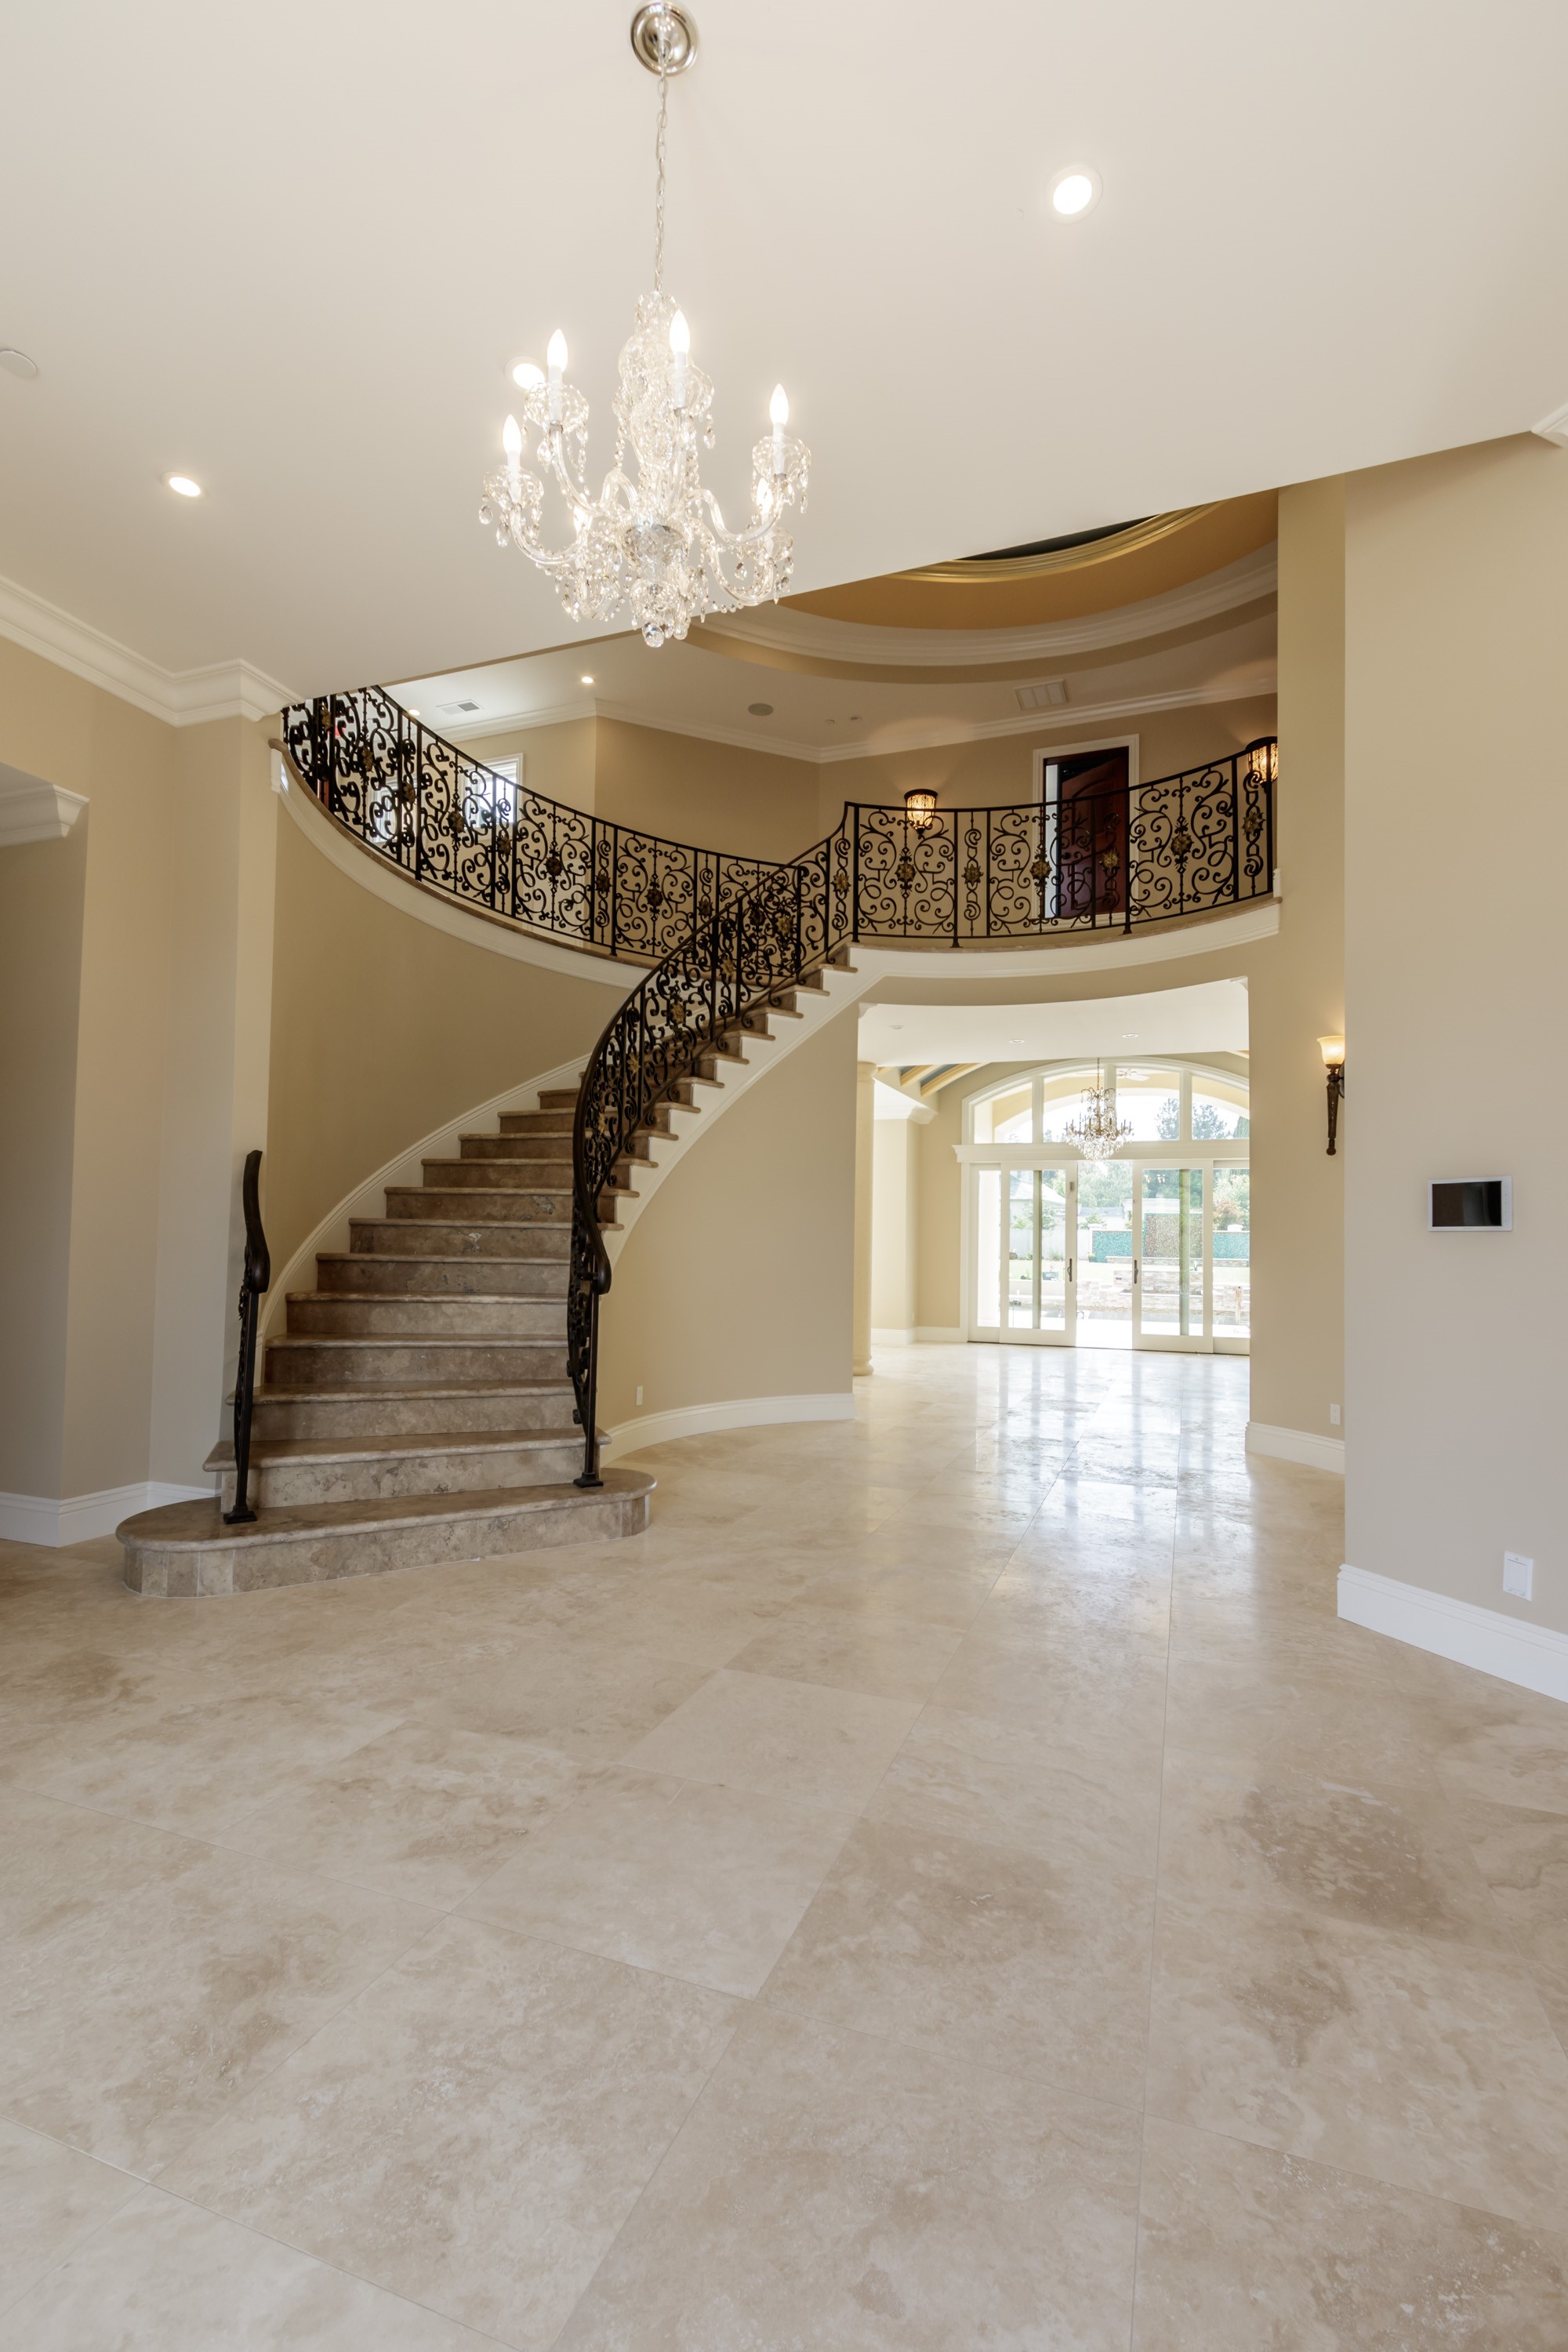 Interior design with staircase of Custom Homes Built in Cupertino